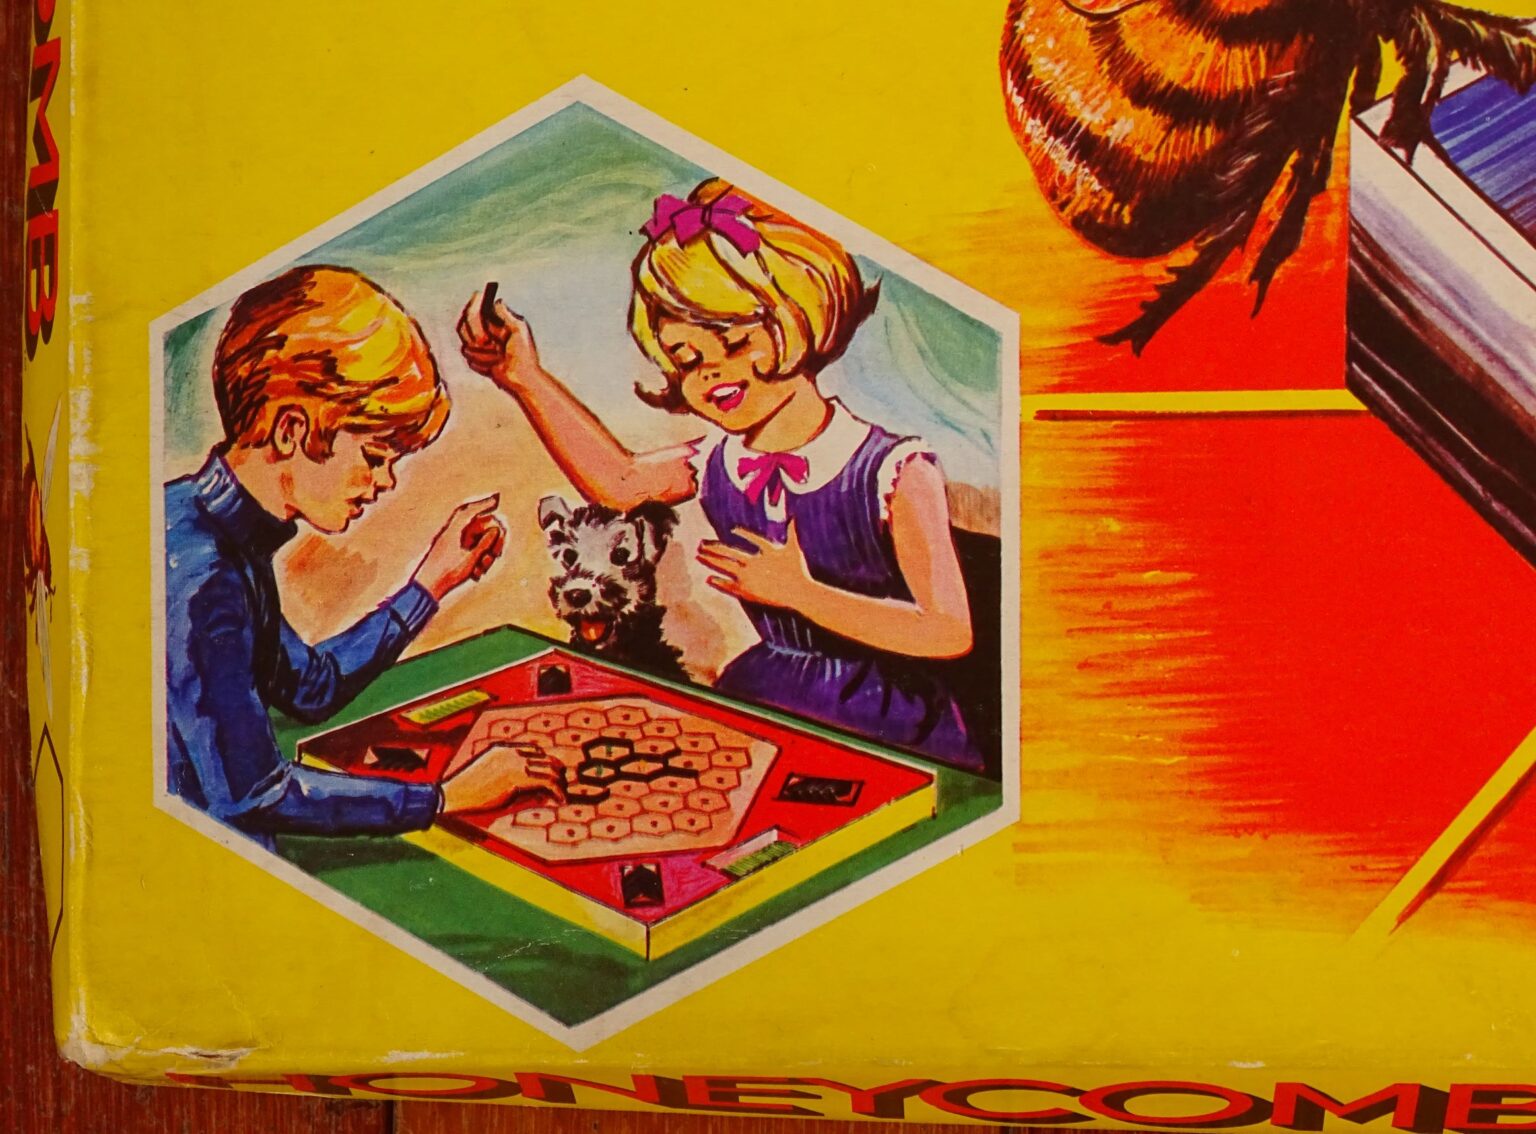 1970 HONEYCOMB, a Marx Game, Swansea, Wales - tomsk3000